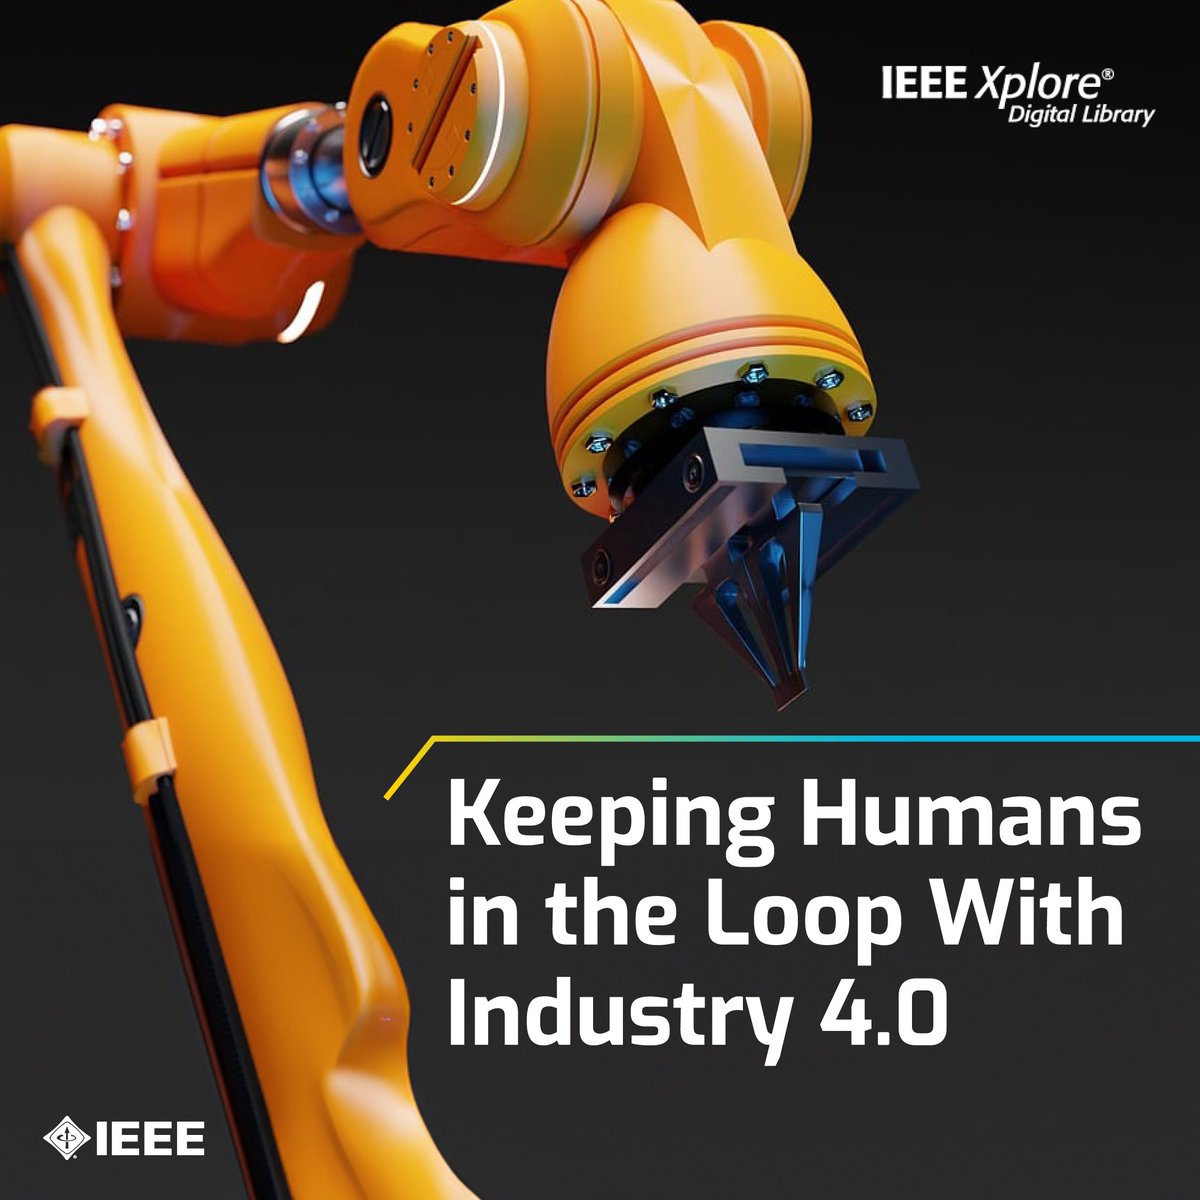 Industry 4.0 is enabling a new wave of automated production with human oversight. Learn about new manufacturing technologies and the importance of human mediation on @IEEEXplore: bit.ly/3UNATTM